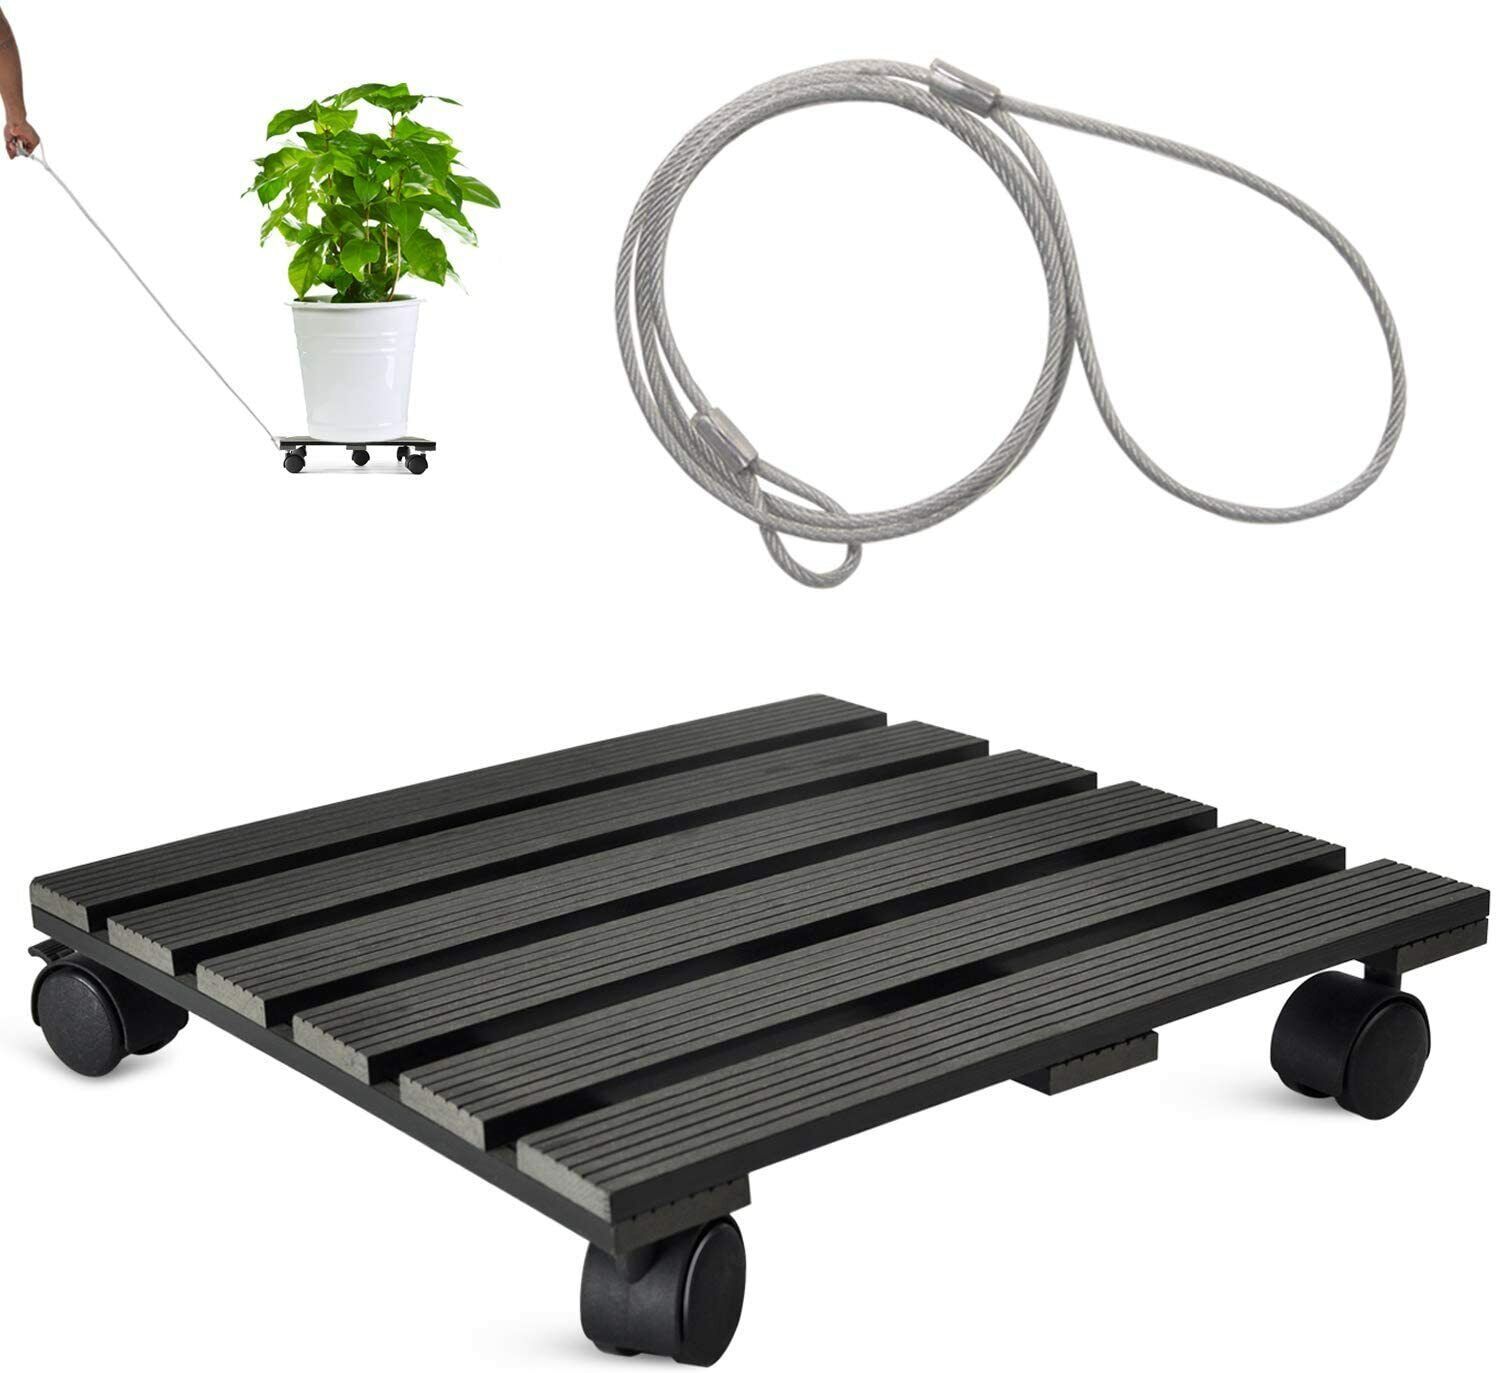 Black 14 Inch Plant Caddy With Wire Rope Plant Pot Stand 5 Wheels Hold Up  150lbs | Ebay Regarding 14 Inch Plant Stands (View 13 of 15)